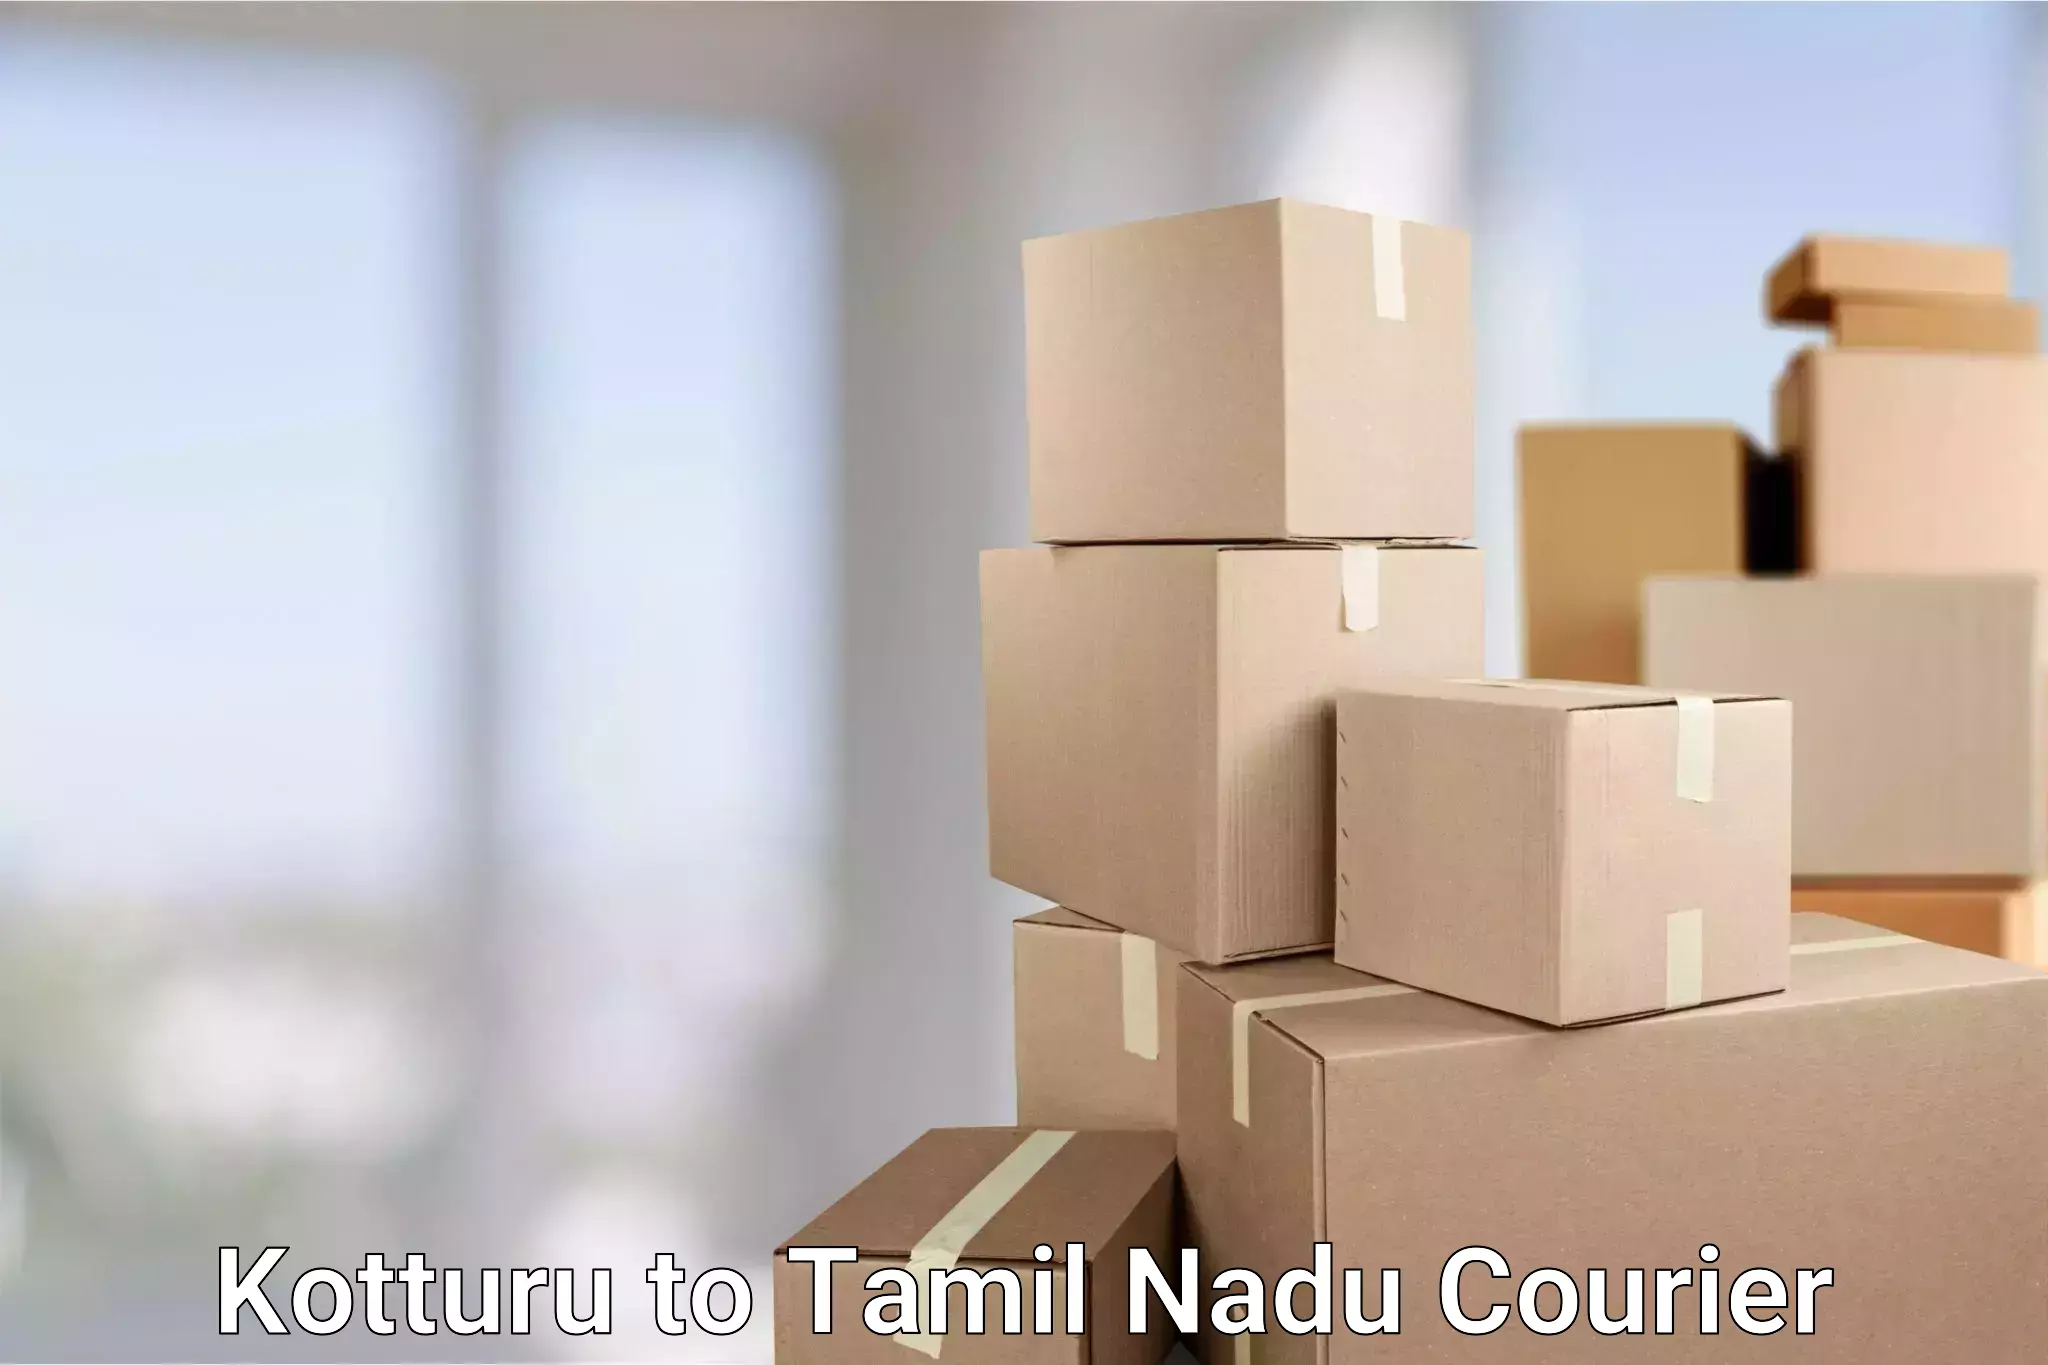 Large-scale shipping solutions Kotturu to Tamil Nadu